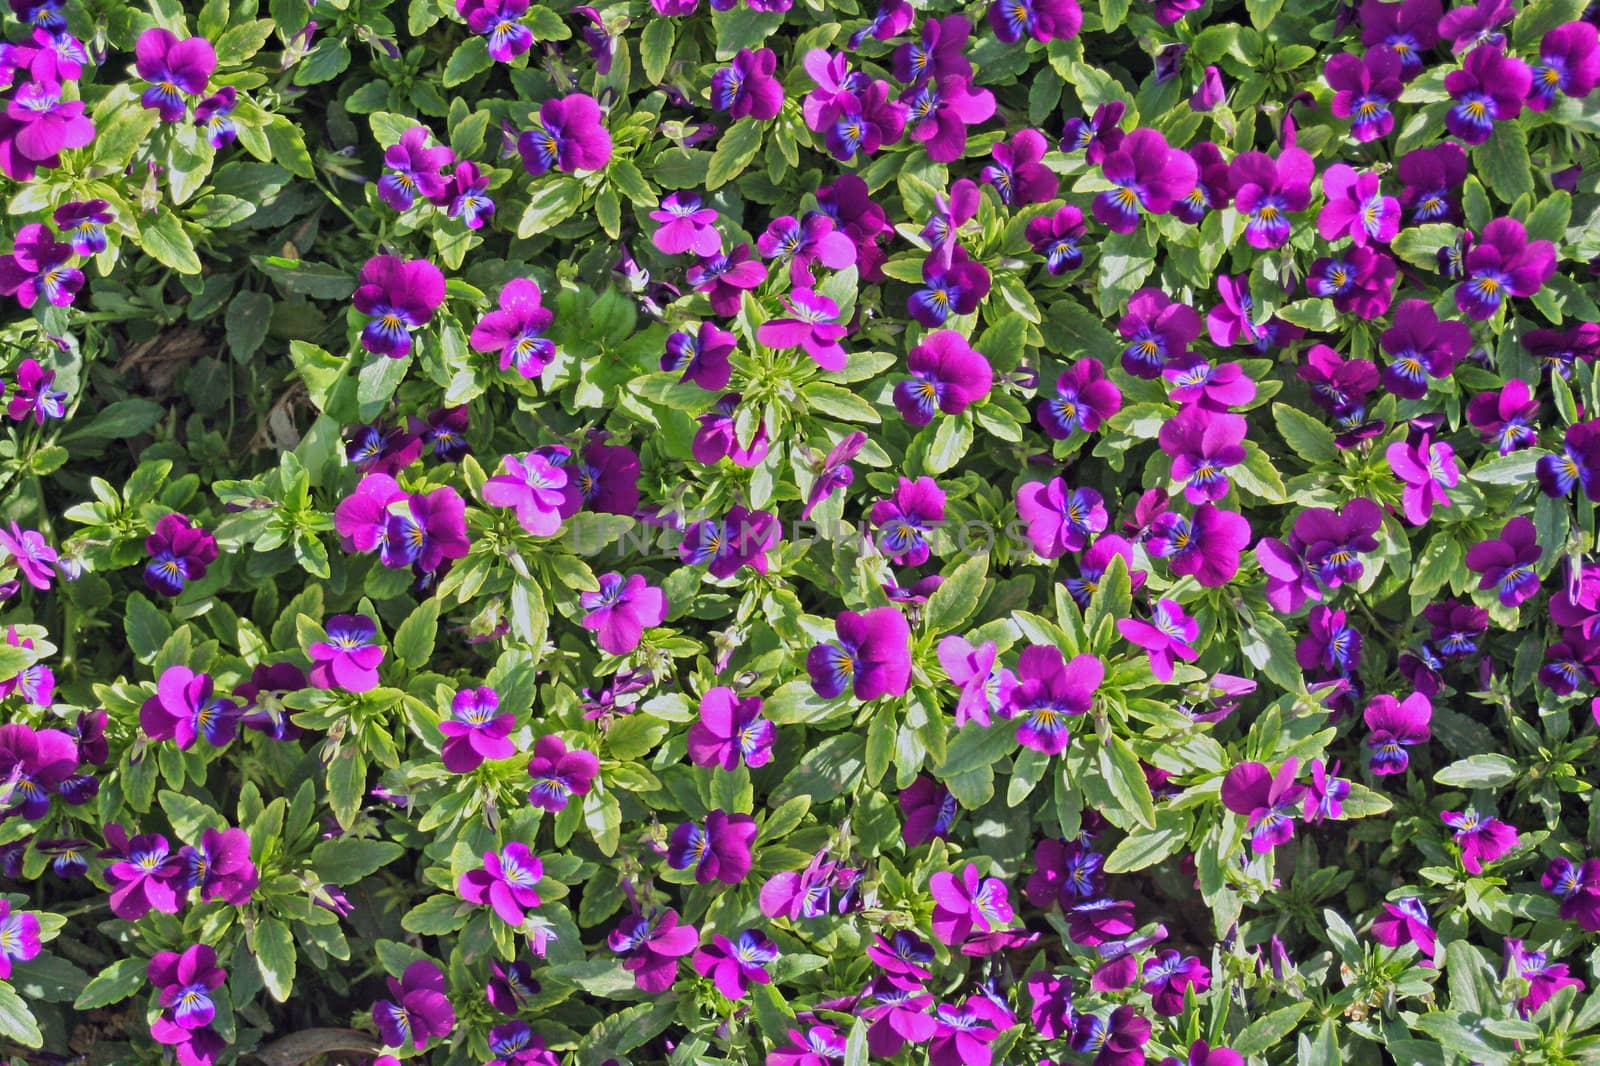 A background of purple flowers